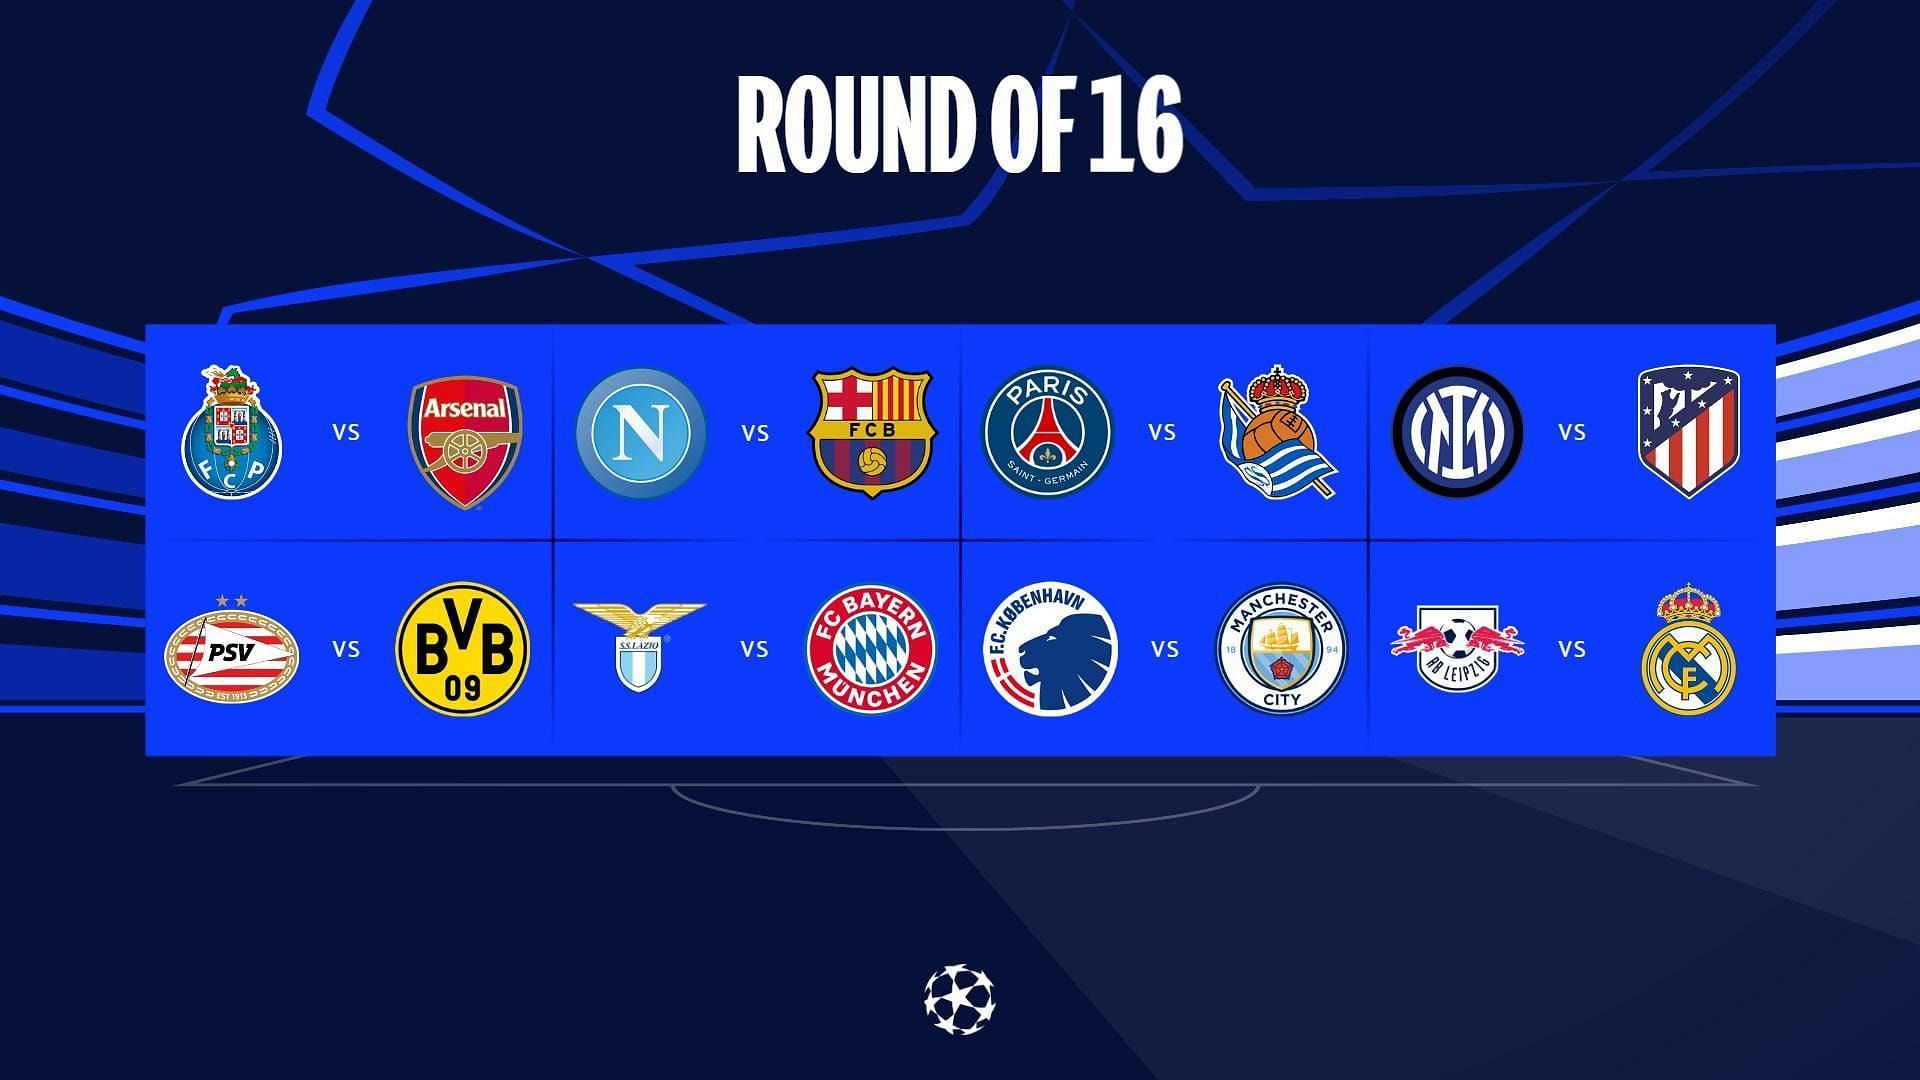 Predicting the likely qualifiers in the 2024 UEFA Champions League Round of 16